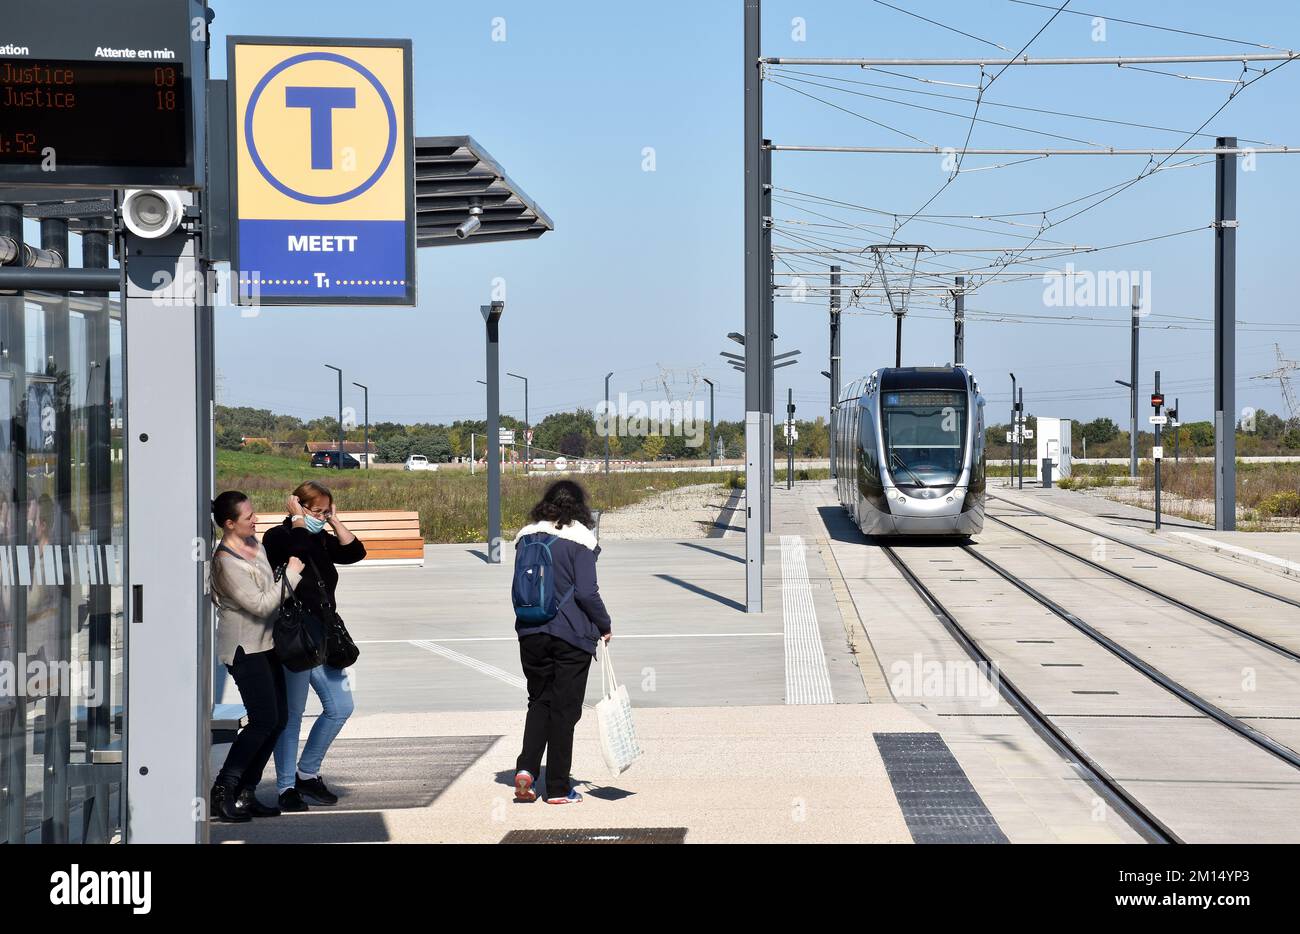 Alstom Citadis 302 type tram at the tram stop for the MEETT exhibition centre, Parc des Expositions, on the Toulouse tramway Stock Photo